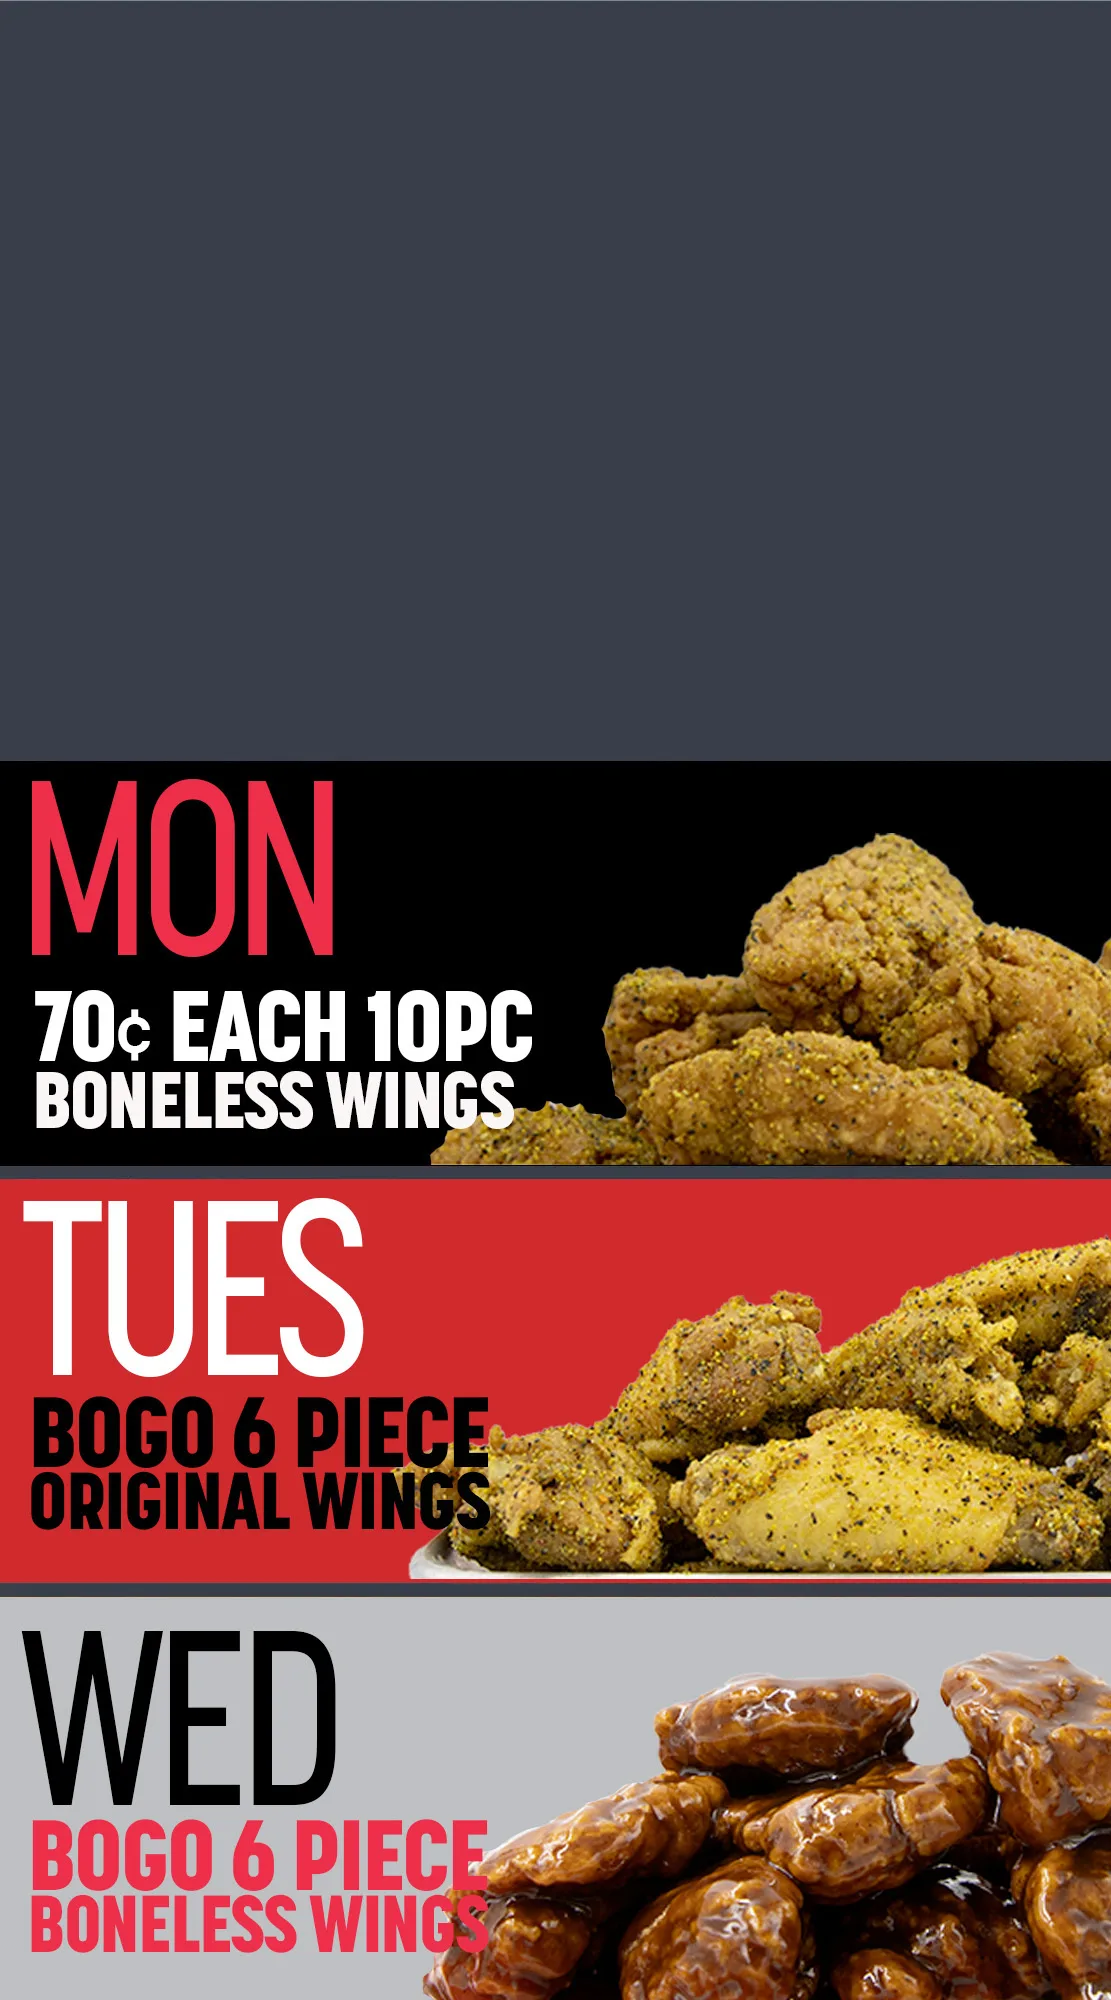 Monday is 70 cent each boneless wings 10pc. Tuesday is buy one get one free 6pc original wings, Wednesday is buy one get one 6pc boneless wings